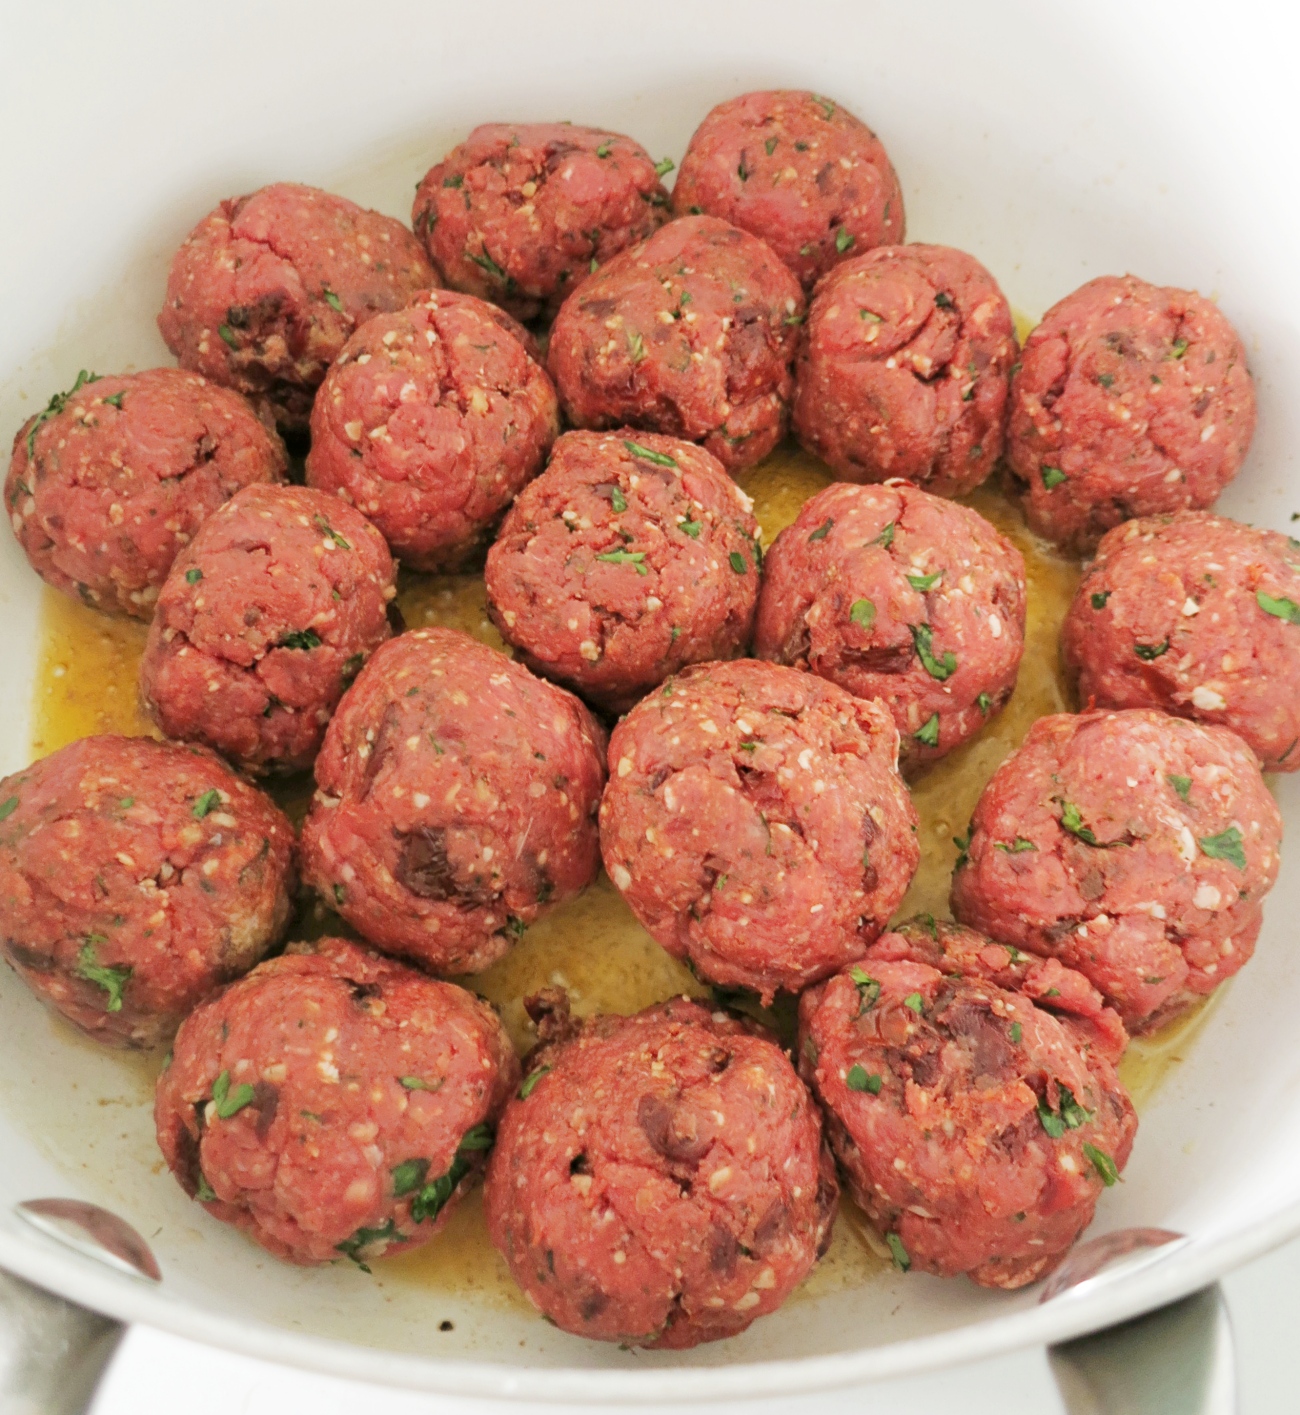 Chop up tomatoes. Combine beef, egg, breadcrumbs, parsley, tomatoes, parmesan, garlic, tomato paste, oregano, and basil. Roll into 18 meatballs.